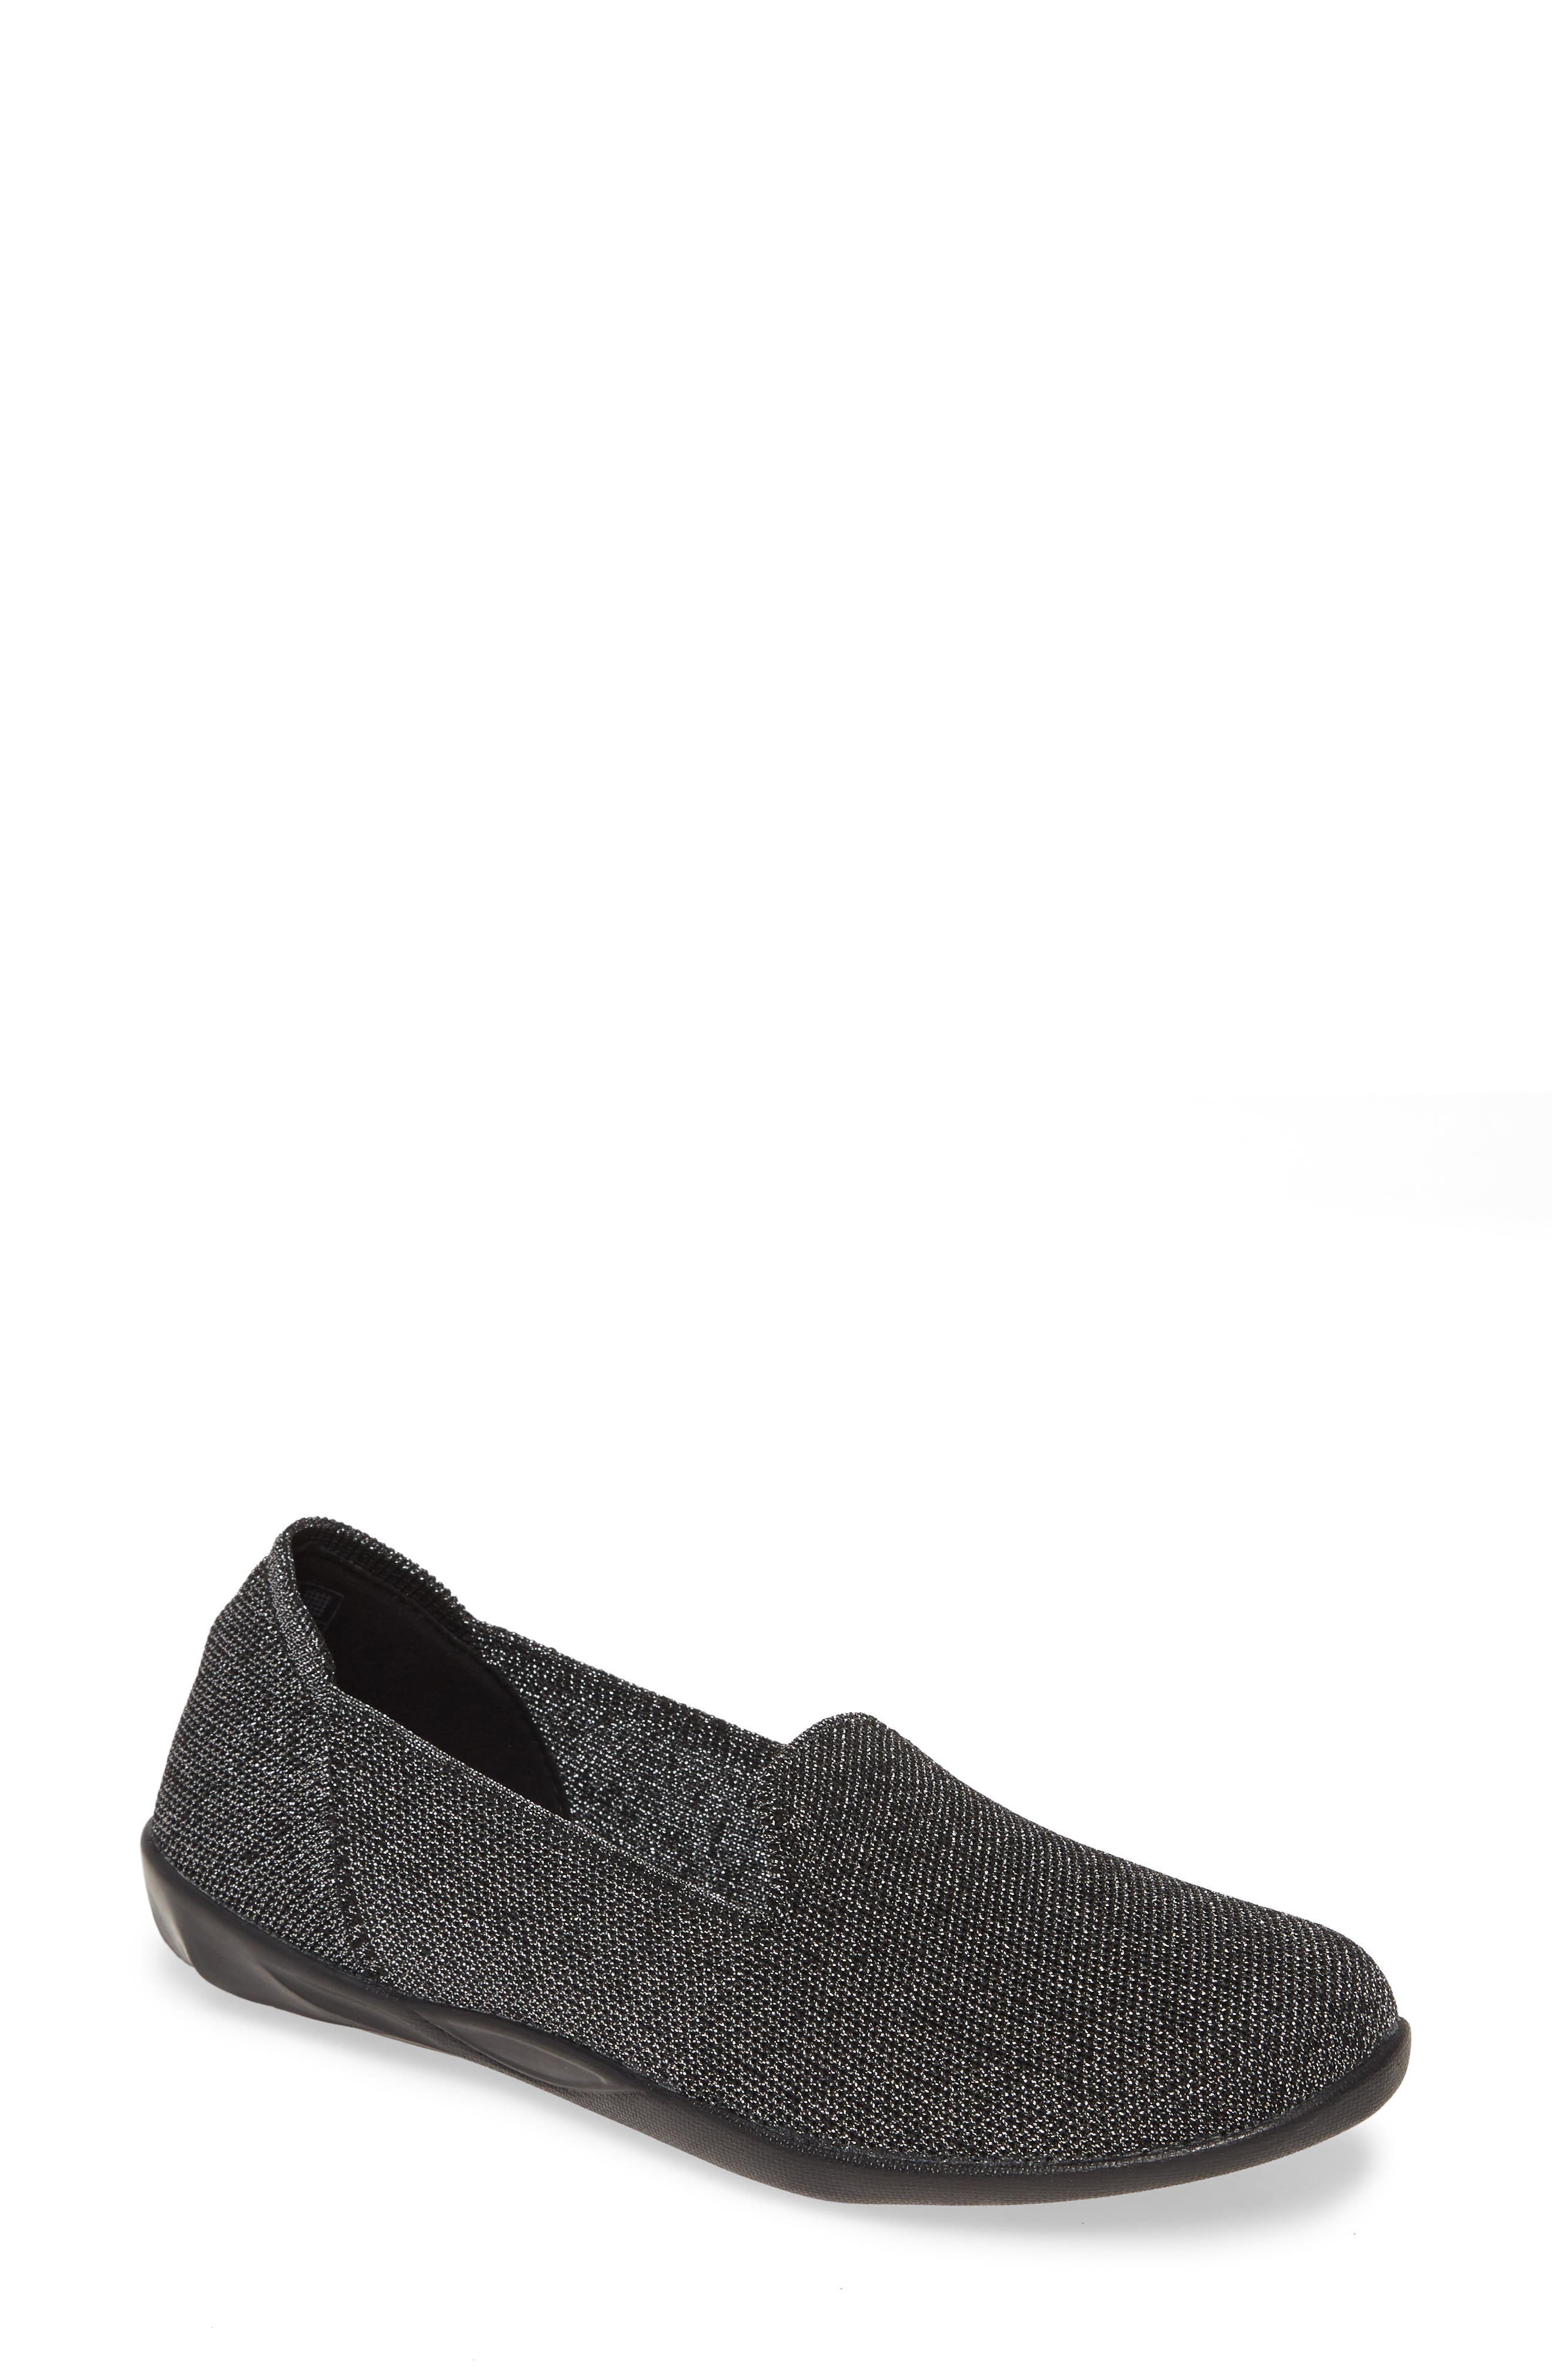 bernie mev. Petra Flat in Pewter Fabric at Nordstrom